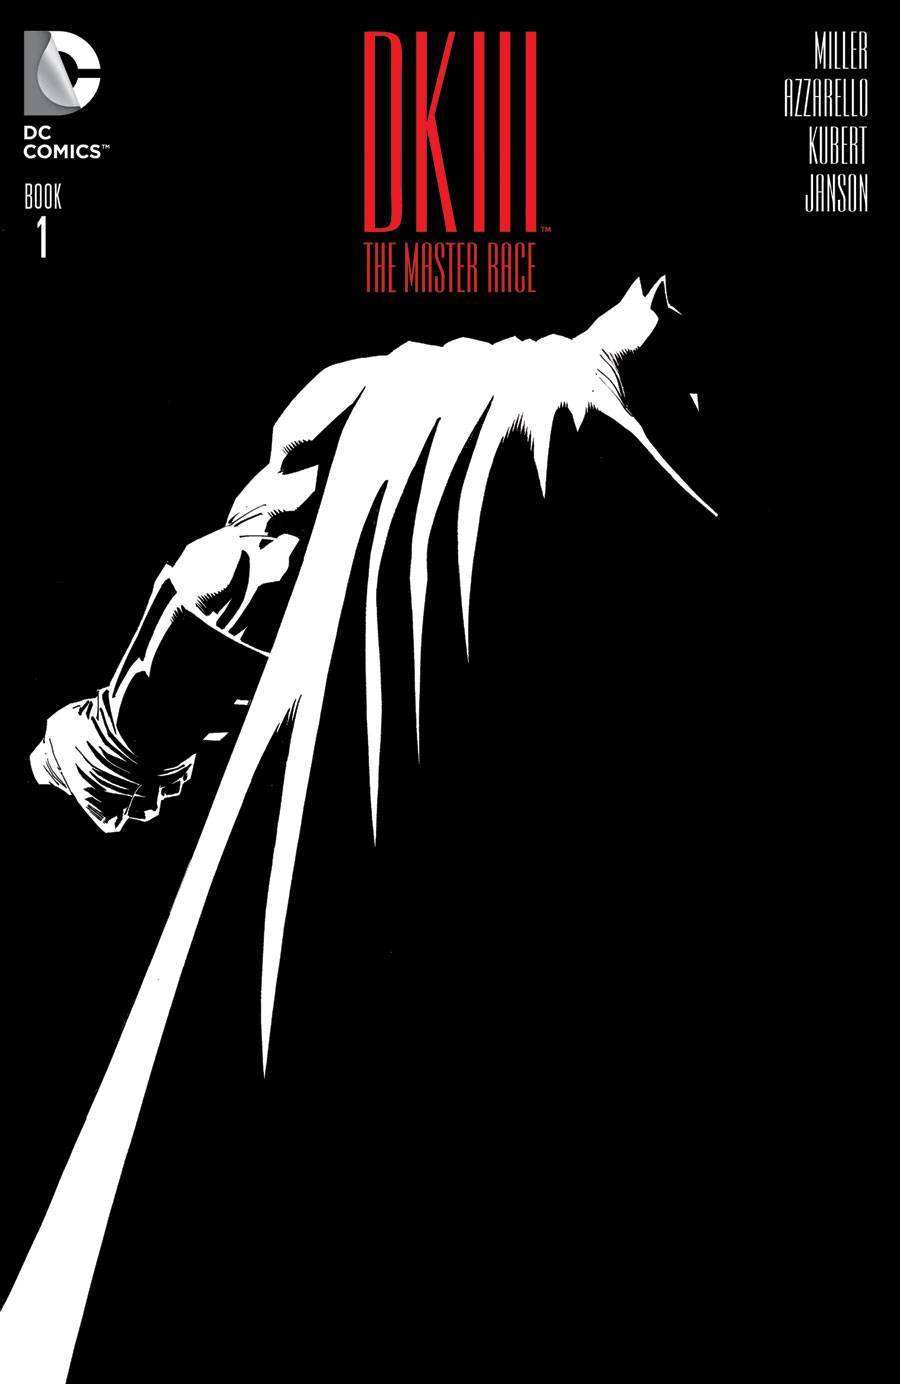 The Dark Knight returns for the final chapter in Frank Miller’s watershed Batman trilogy! Prepare for the arrival of DKIII: The Master Race #1, out next Wednesday at Curious Comics!